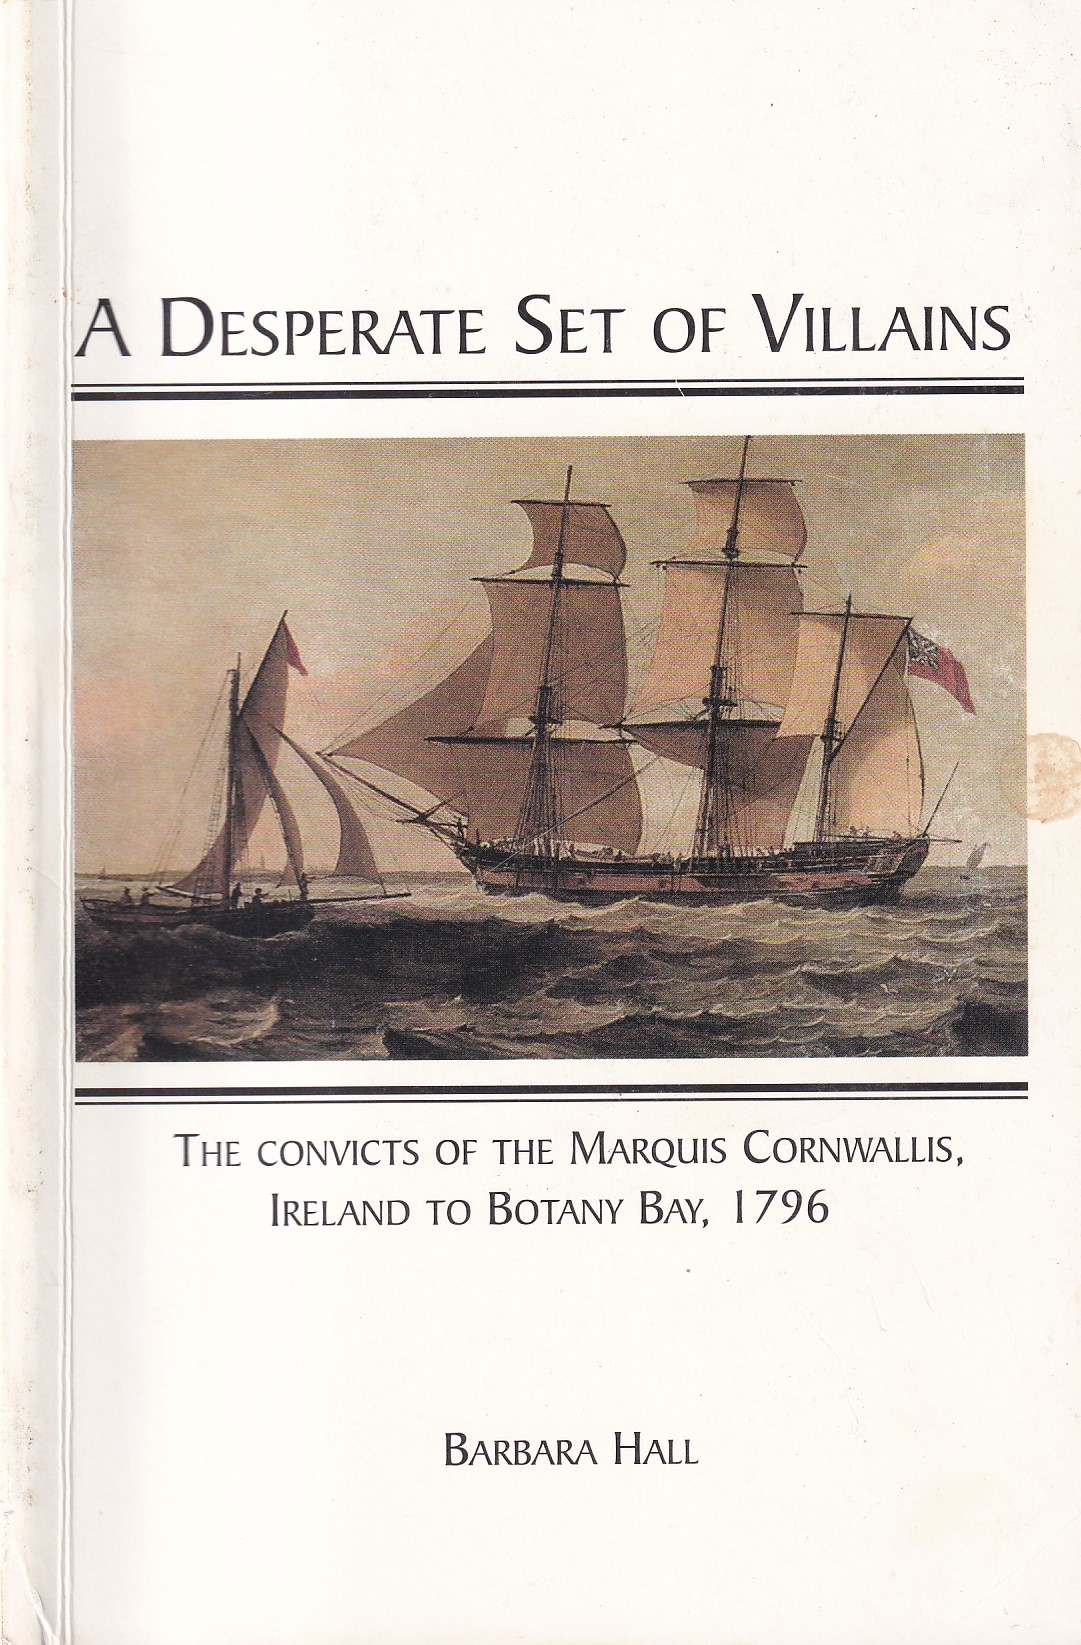 A Desperate Set of Villains: The Convicts of the Marquis Cornwallis, Ireland to Botany Bay, 1796 | Barbara Hall | Charlie Byrne's